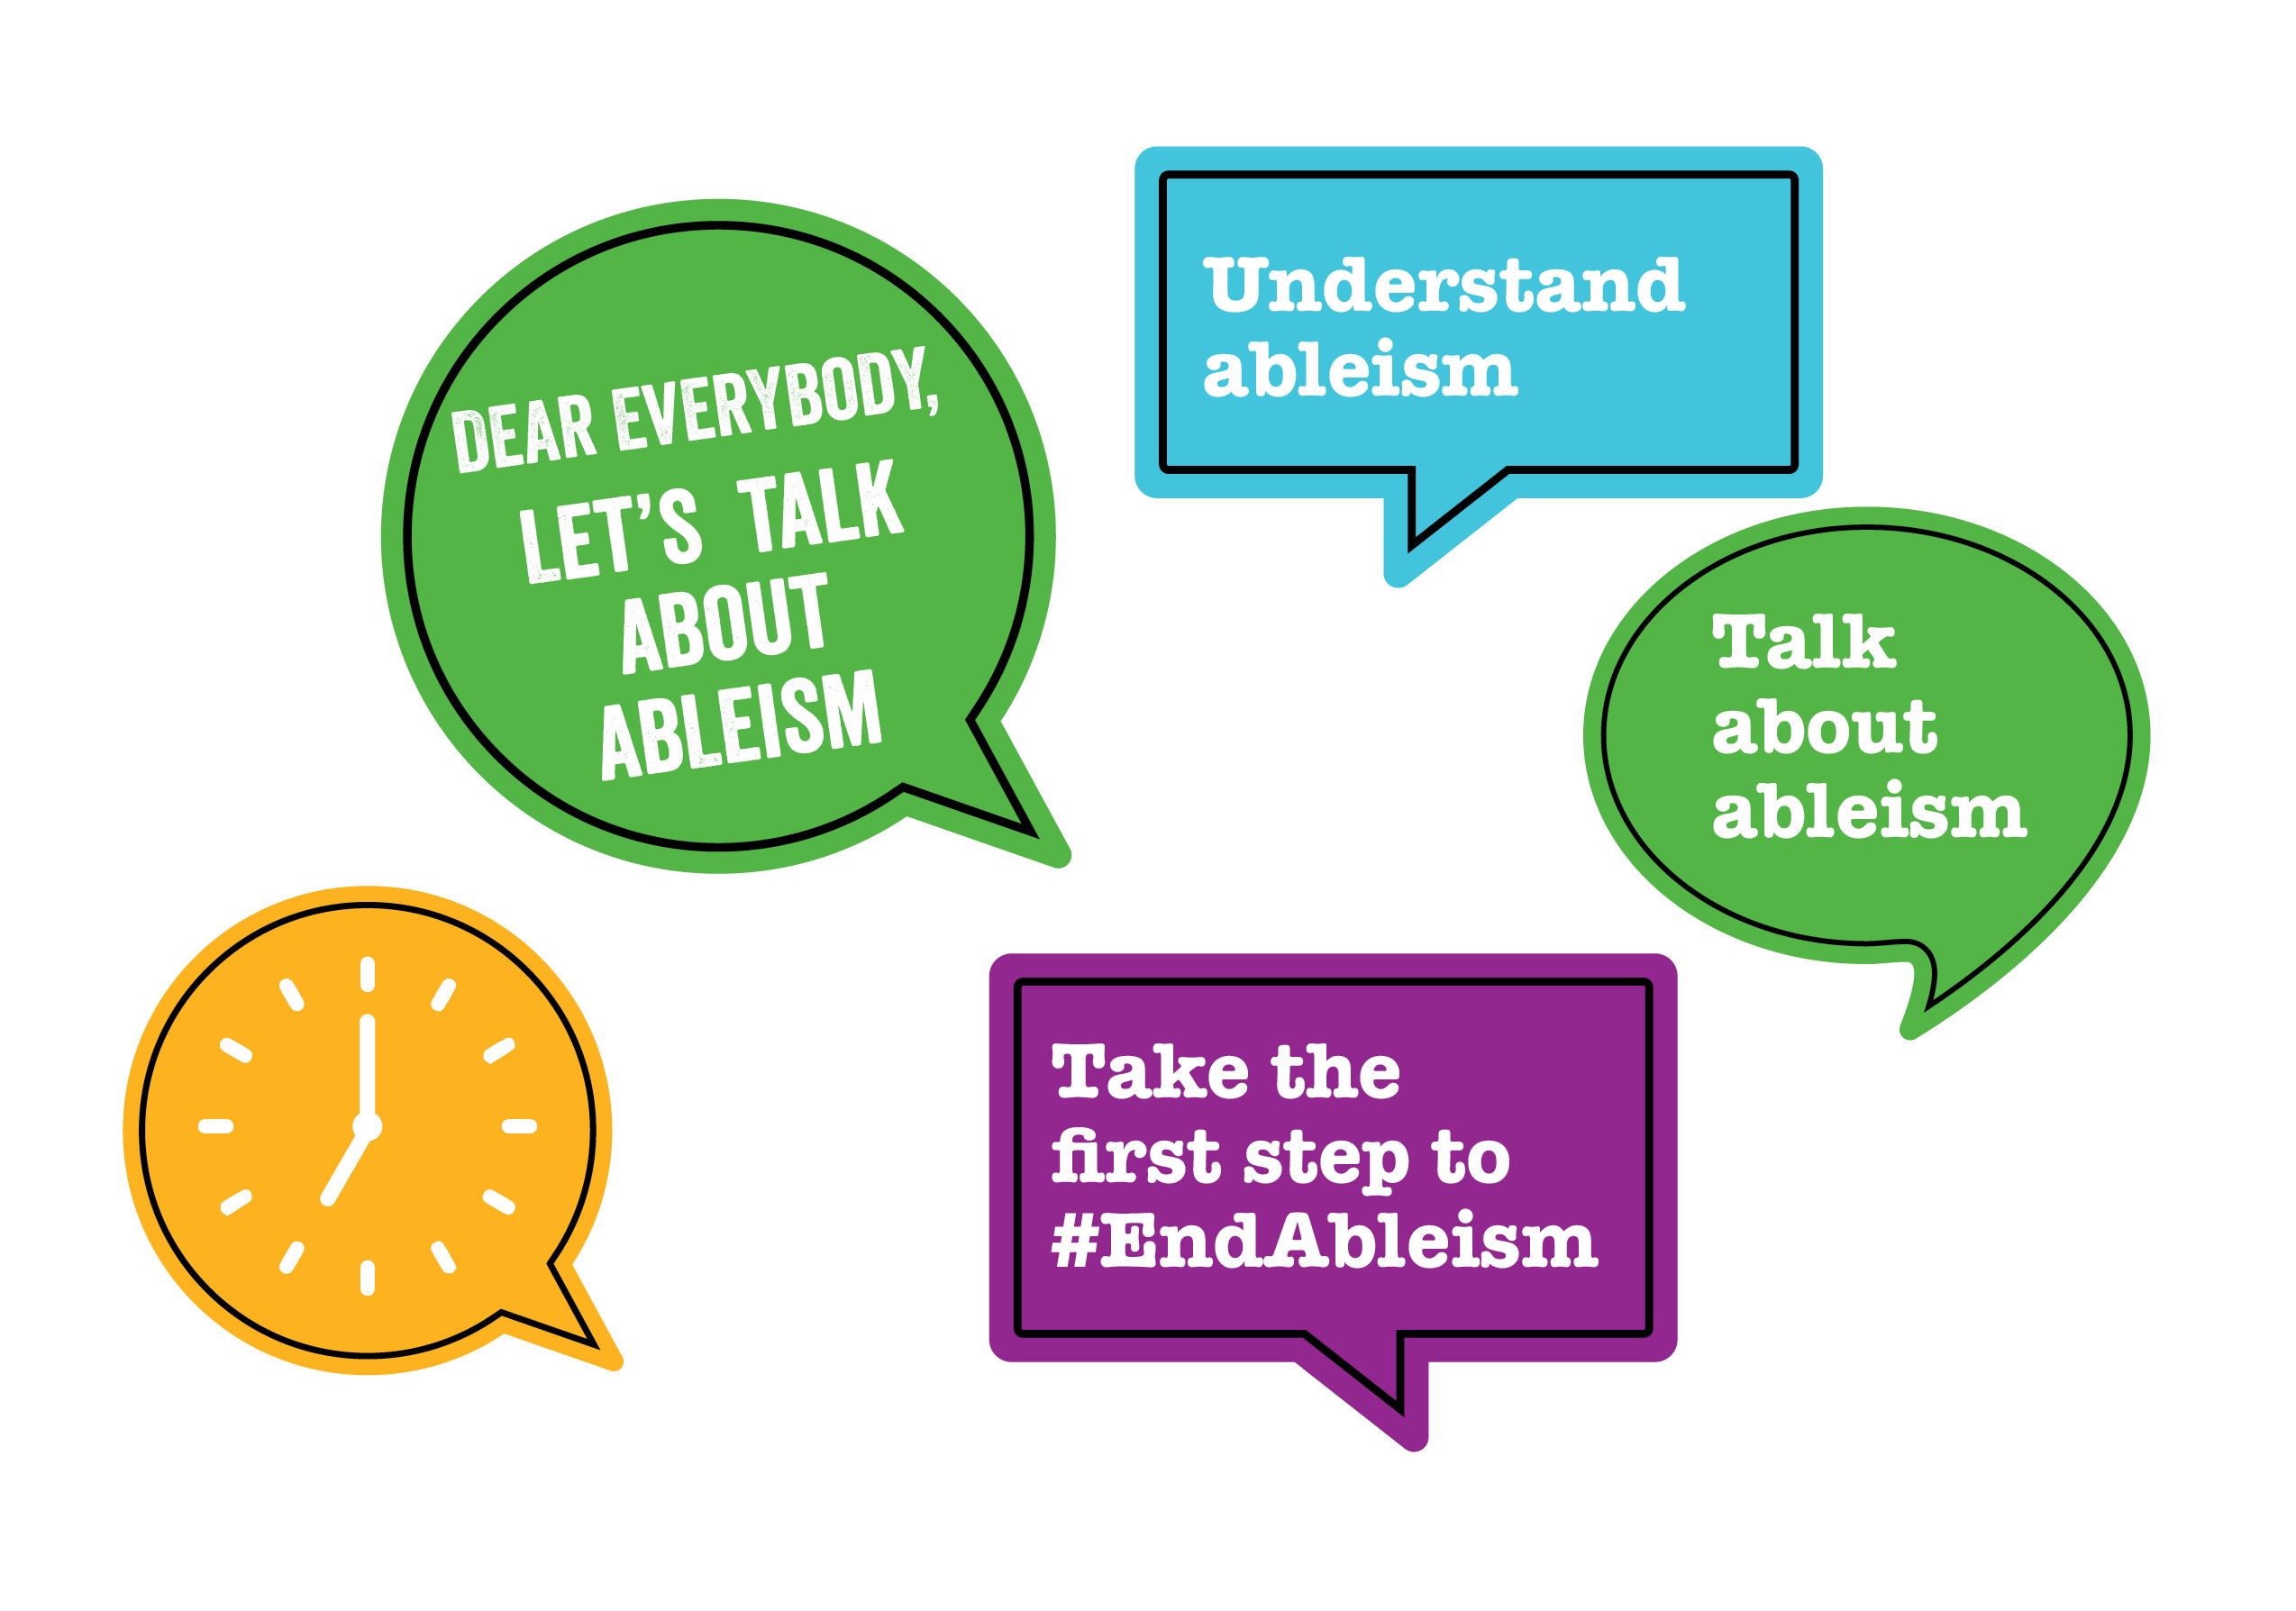 Speech bubbles with campaign messages on ending ableism